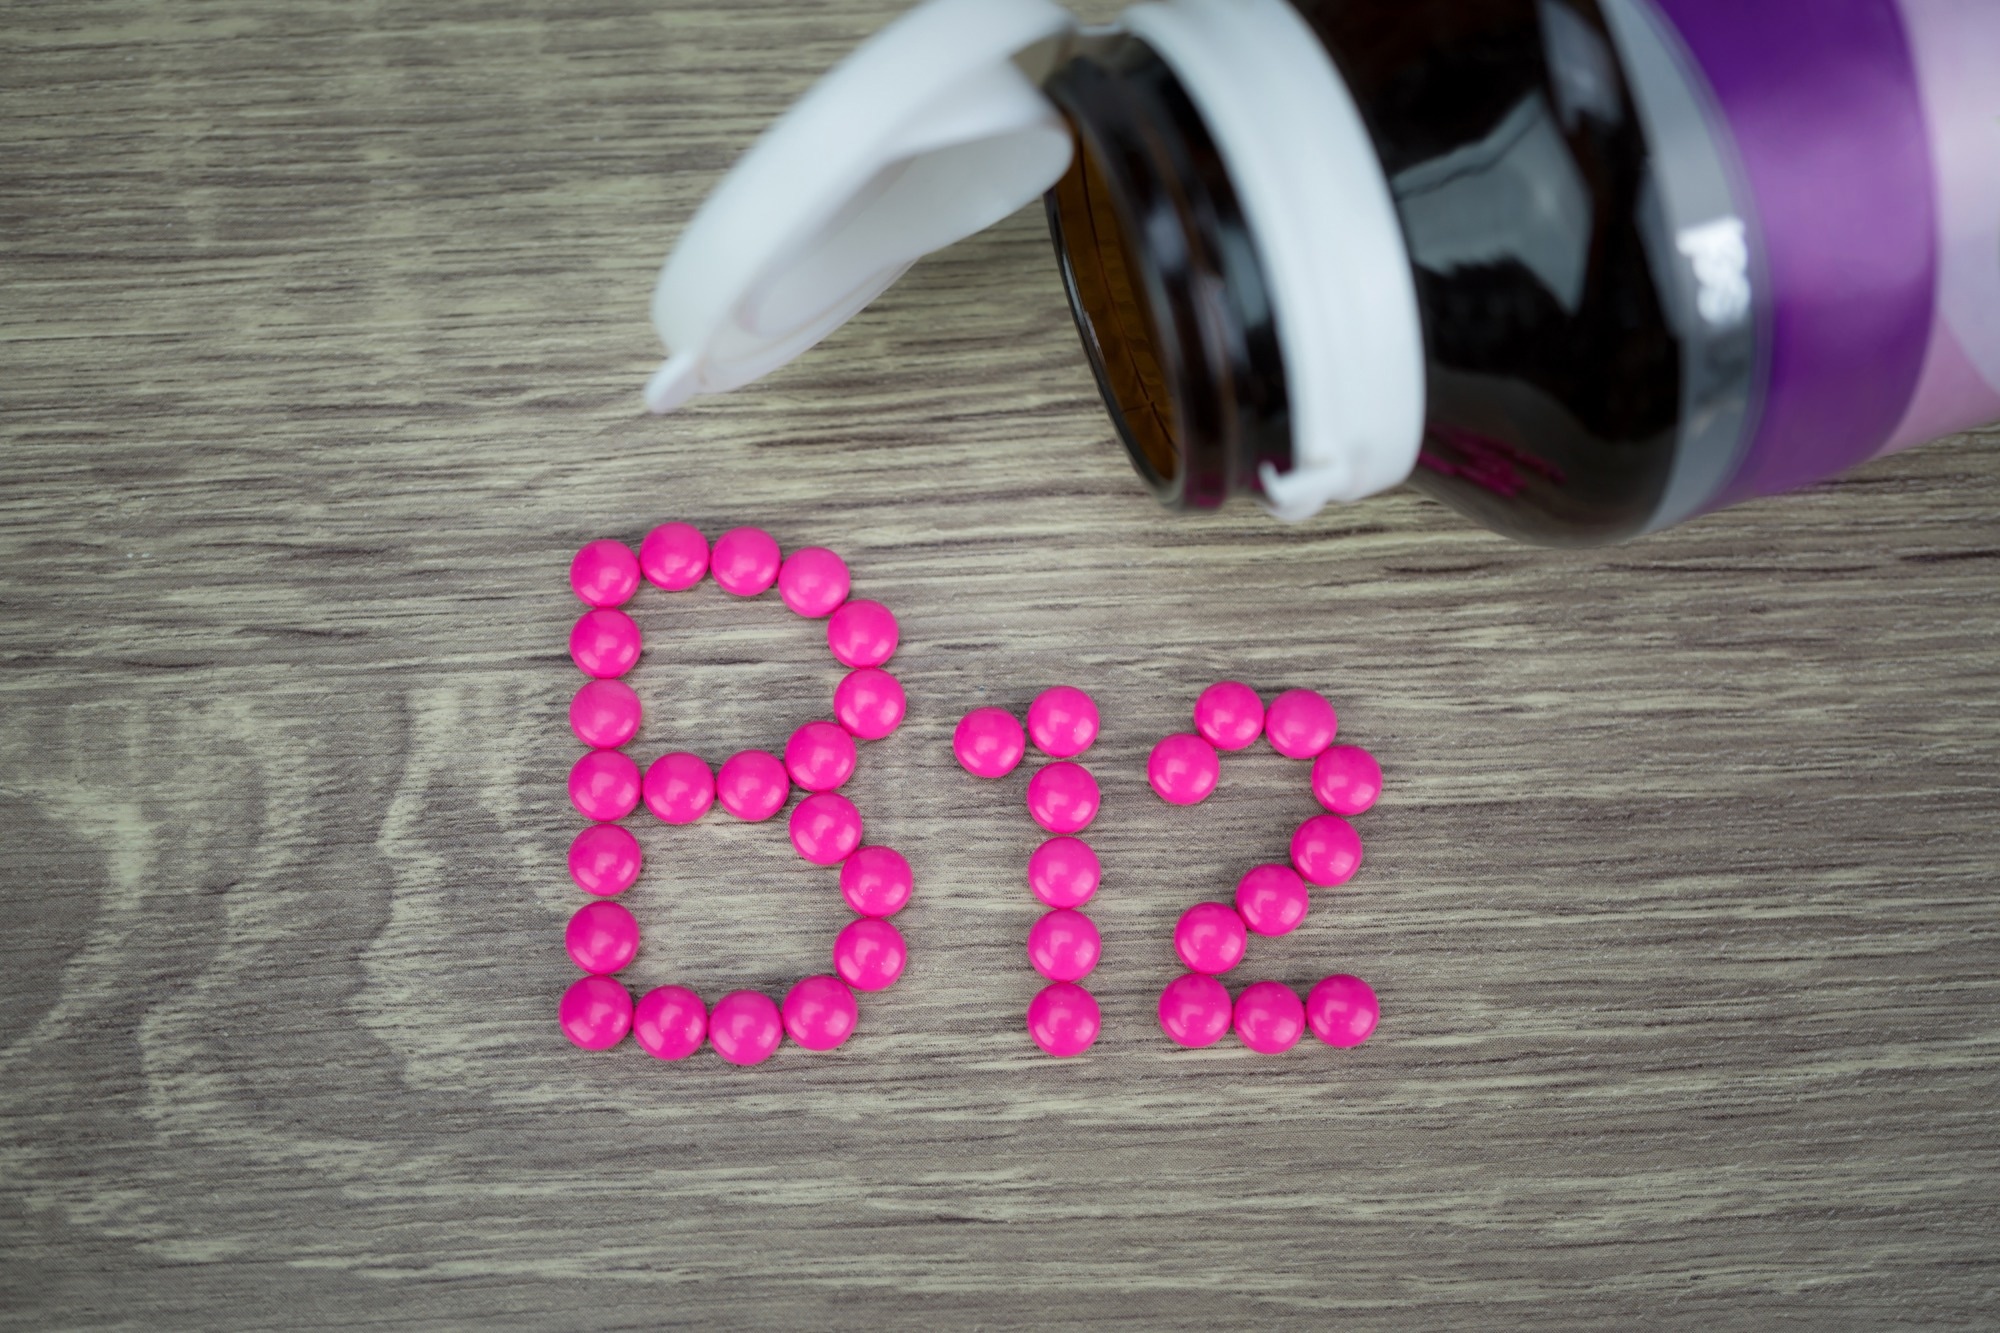 Study: The effect of vitamin B12 supplementation during pregnancy on infant growth and development in Nepal: a community-based, double-blind, randomised, placebo-controlled trial. Image Credit: NatchaS/Shutterstock.com